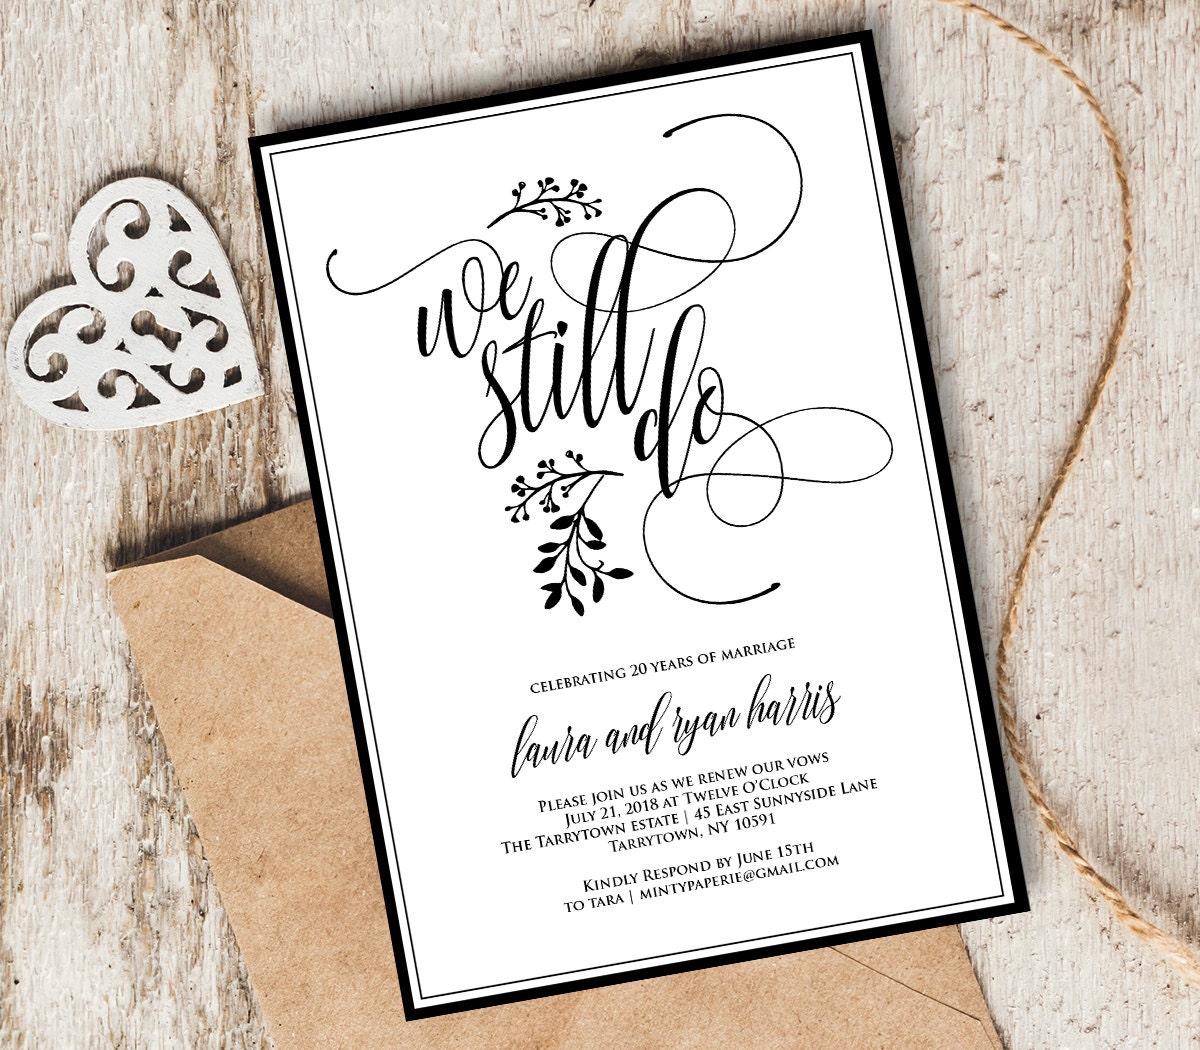 Vow Renewal Invitation Template We Still Do Instant